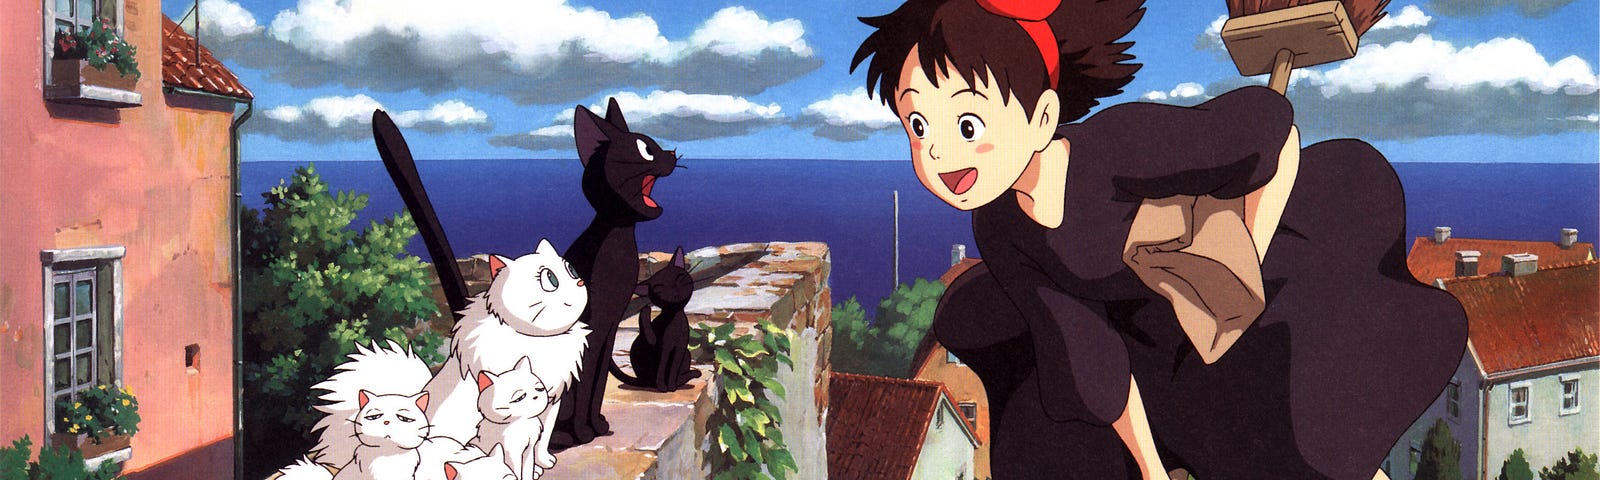 San Francisco, Kiki’s Delivery Service and feeling stuck. 